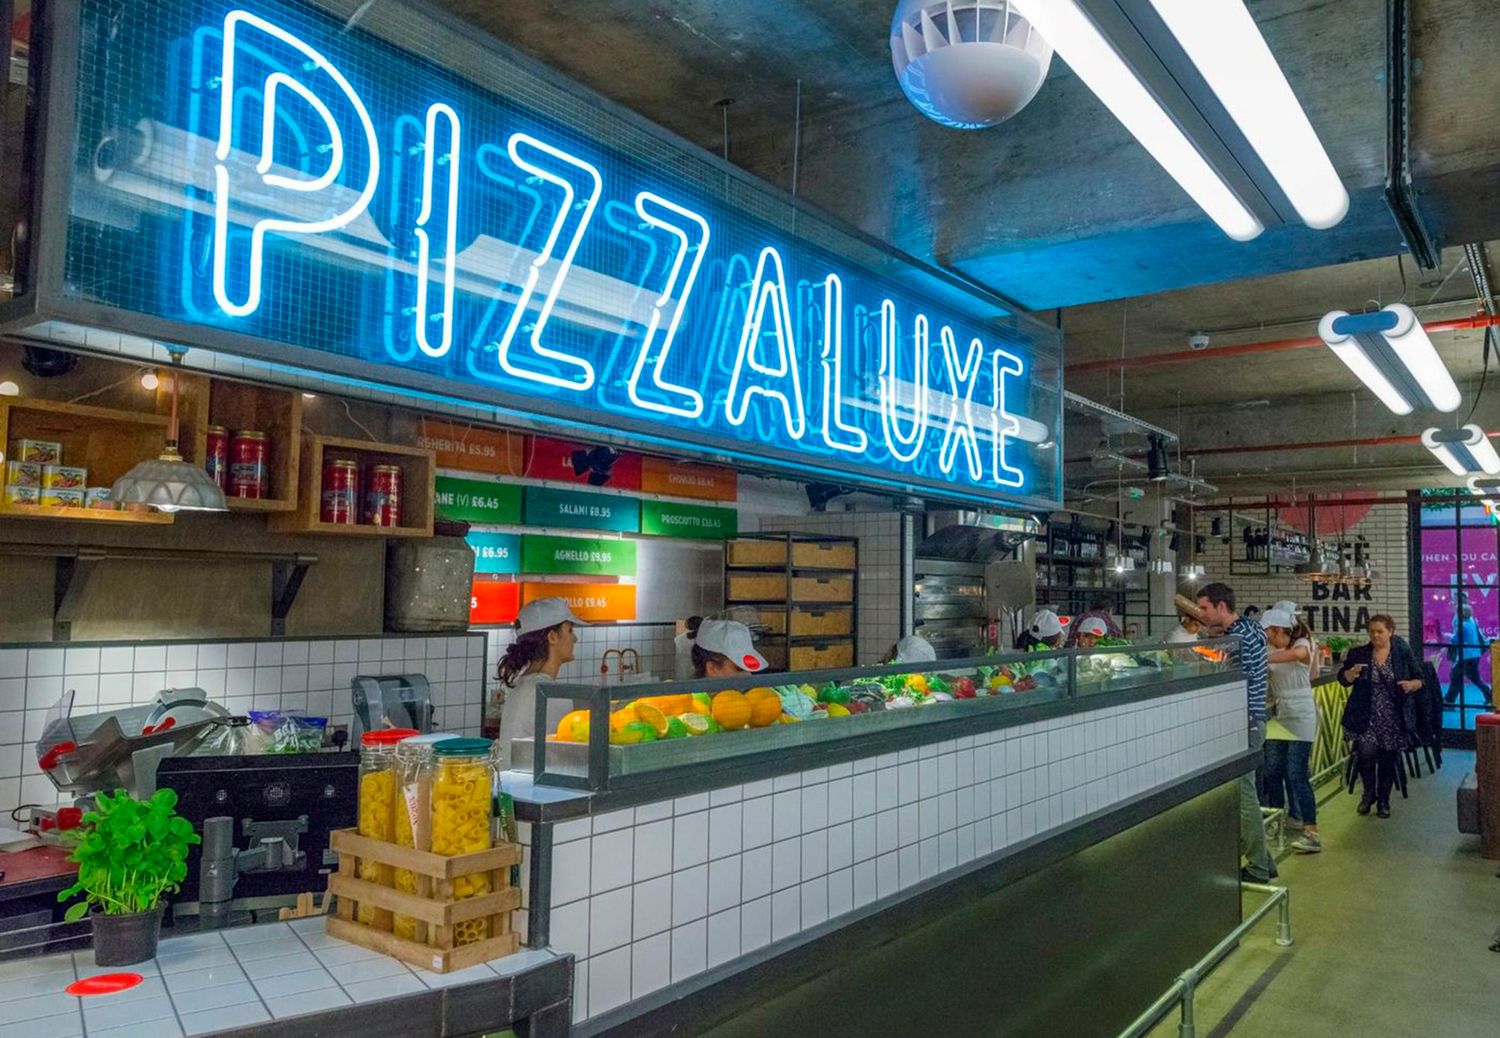 Signage for PizzaLuxe designed by Touch